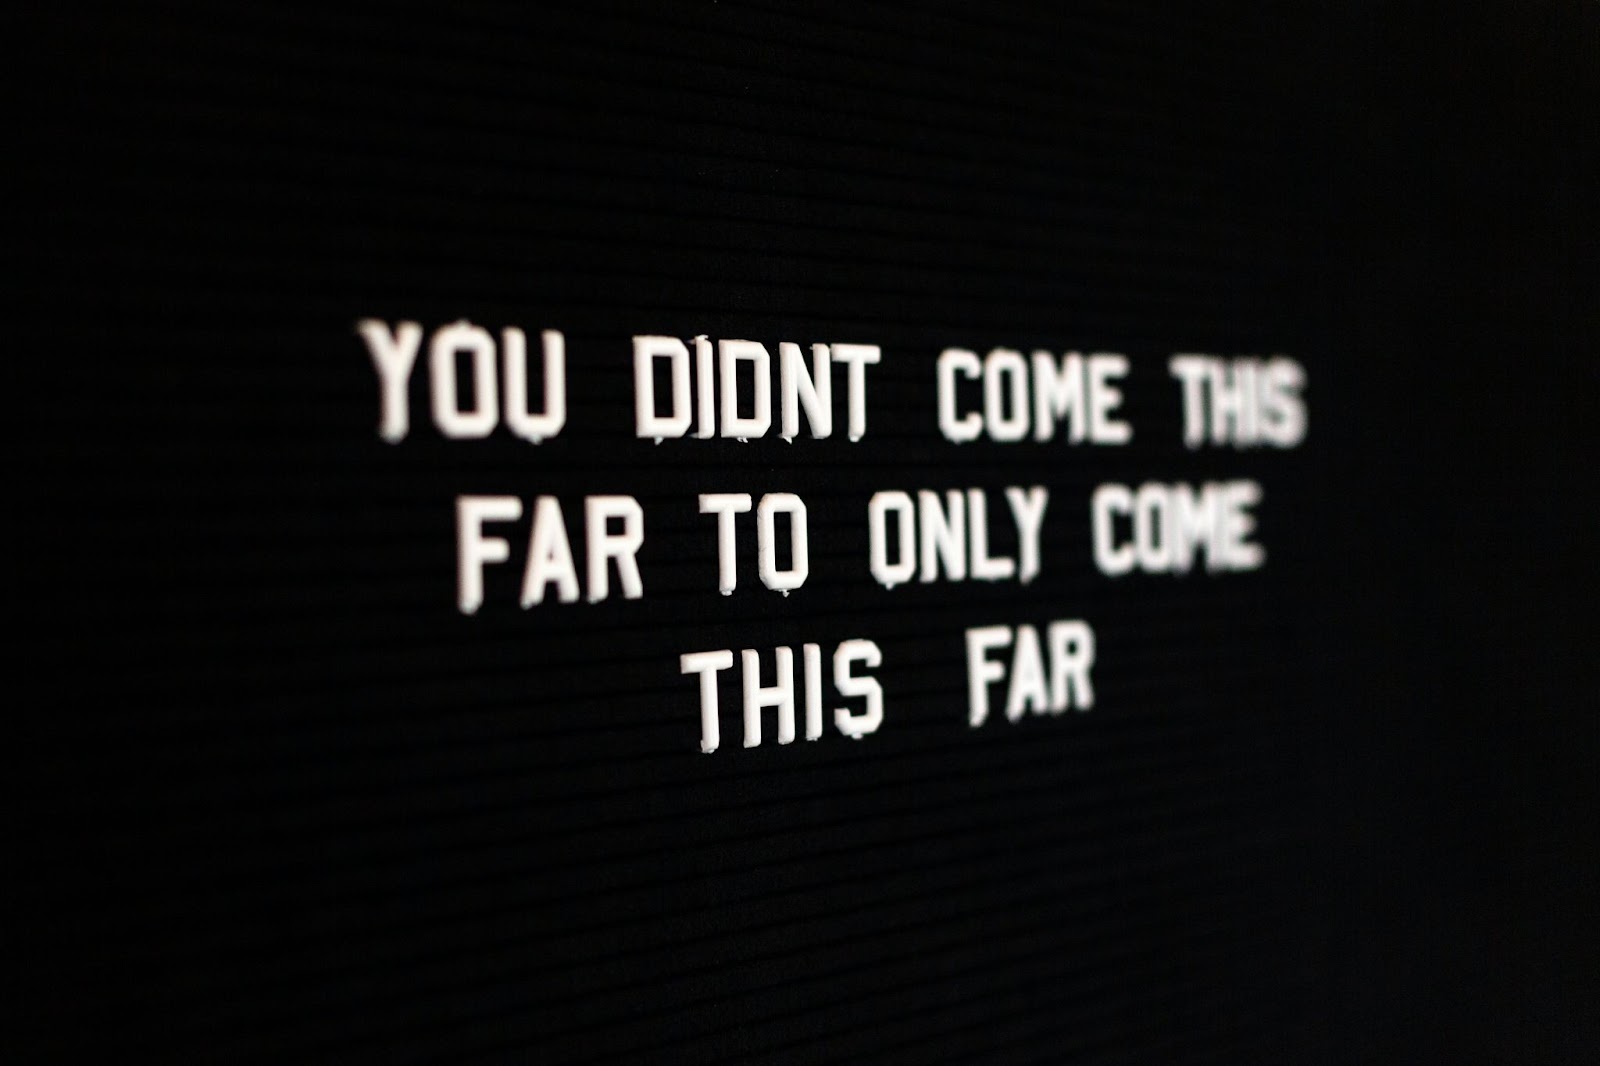 You didn't come this far to only come this far image banner